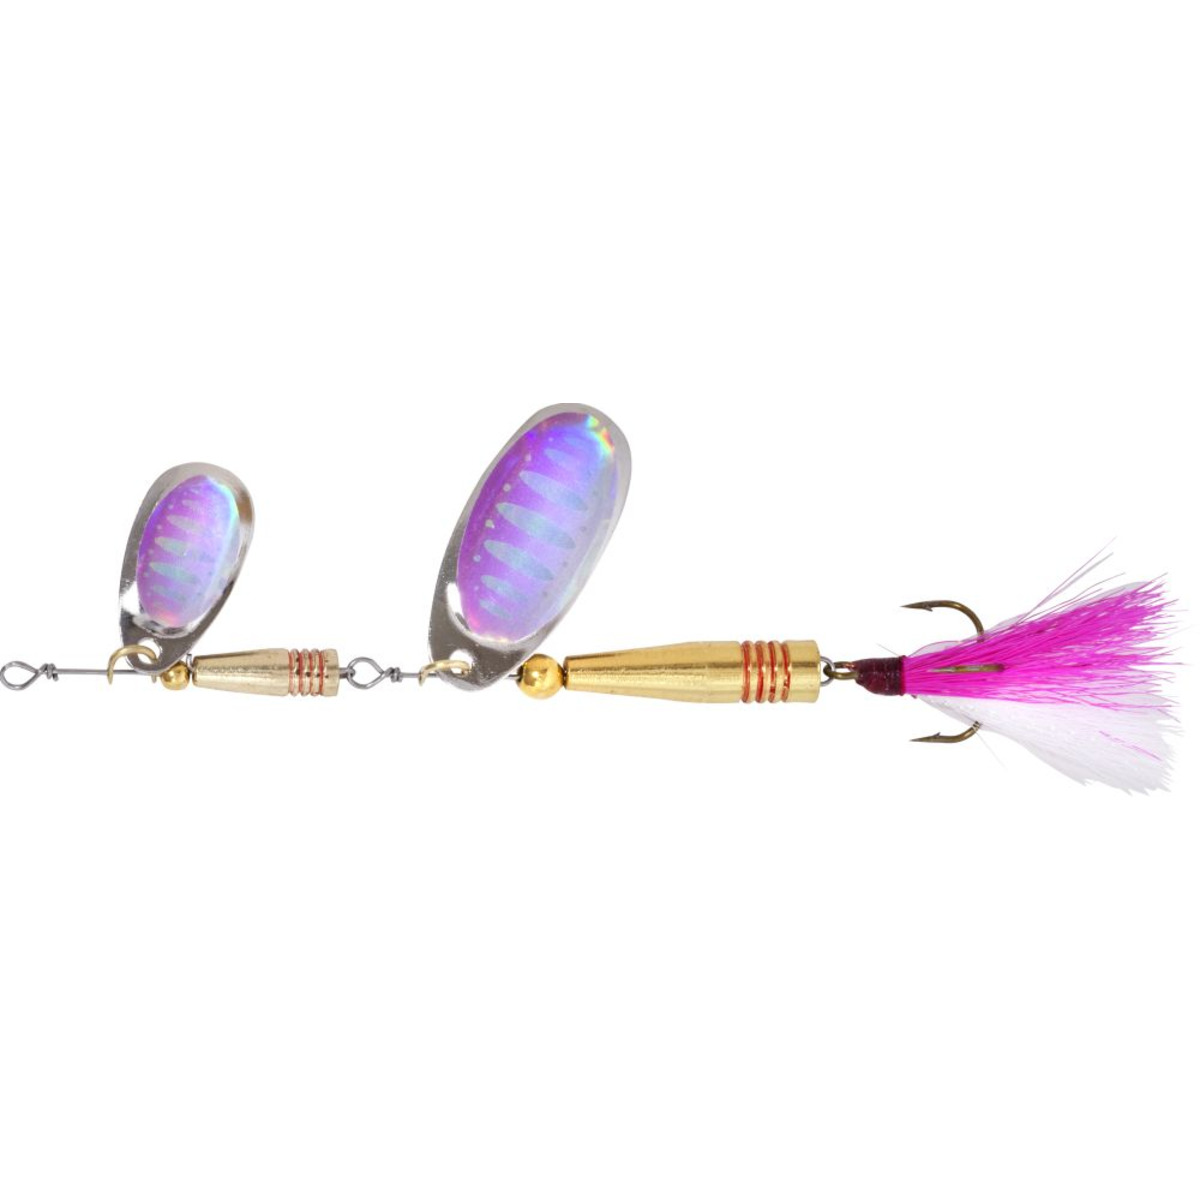 Zebco Waterwings Double Blade - 10 g - pink/white